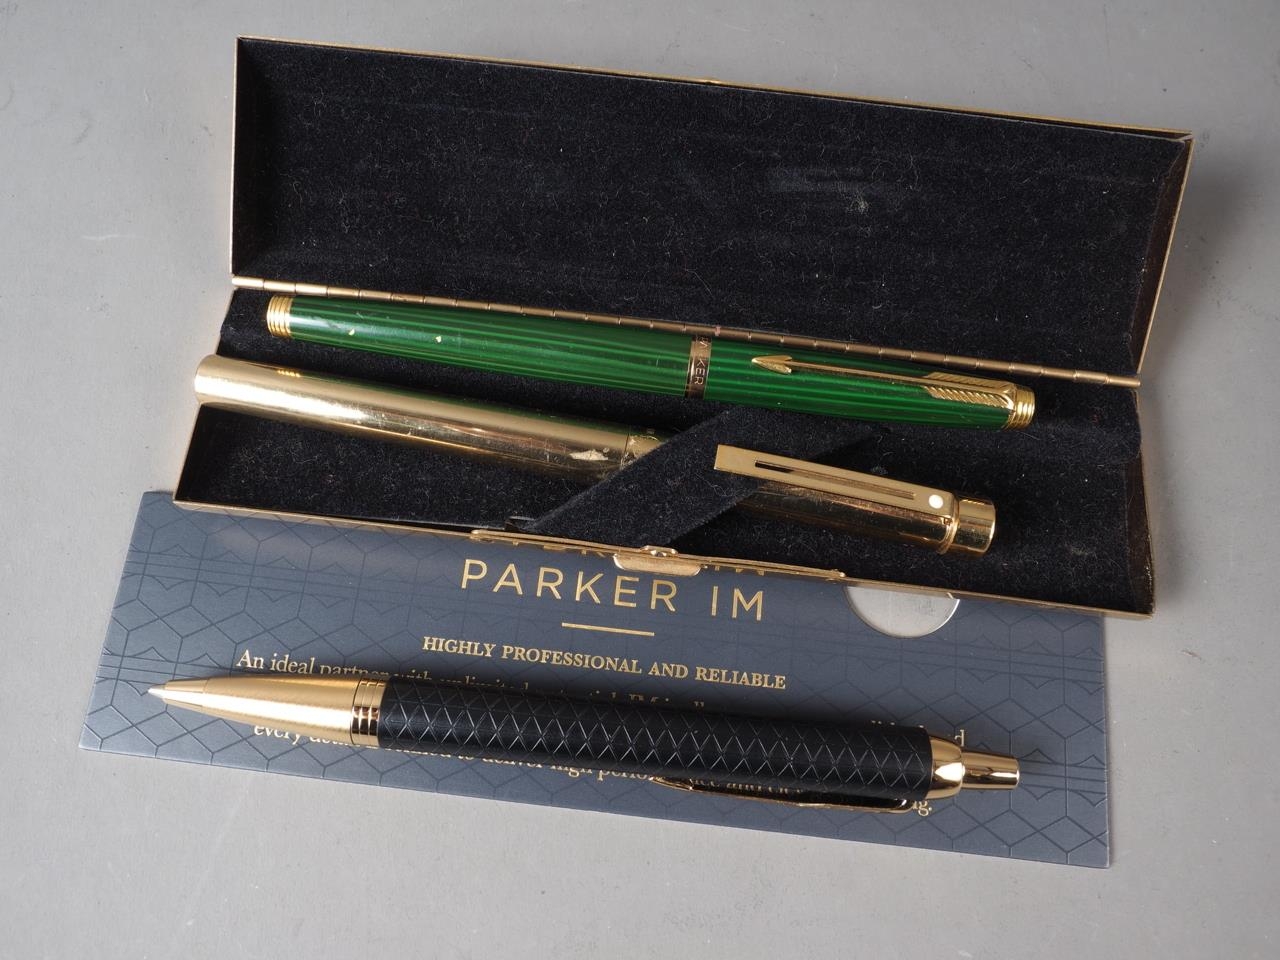 A green lacquered Parker fountain pen, a Sheaffer "Imperial Brass" fountain pen, in box, and a